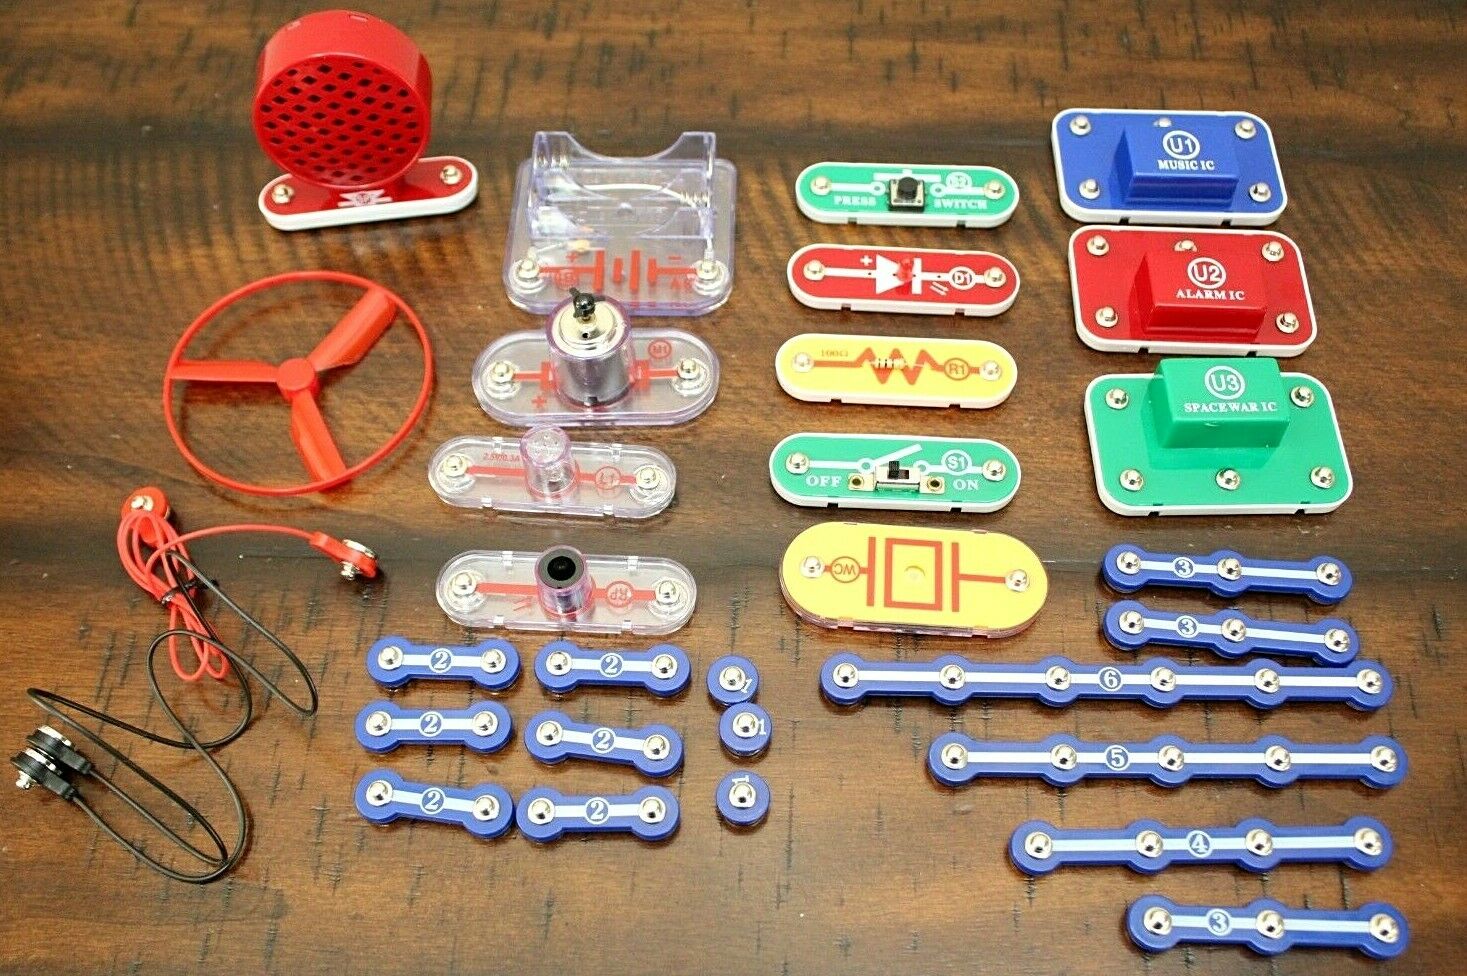 30+ Mixed Lot Elenco Electronic Snap Circuits Motor Speaker Switch Replacements